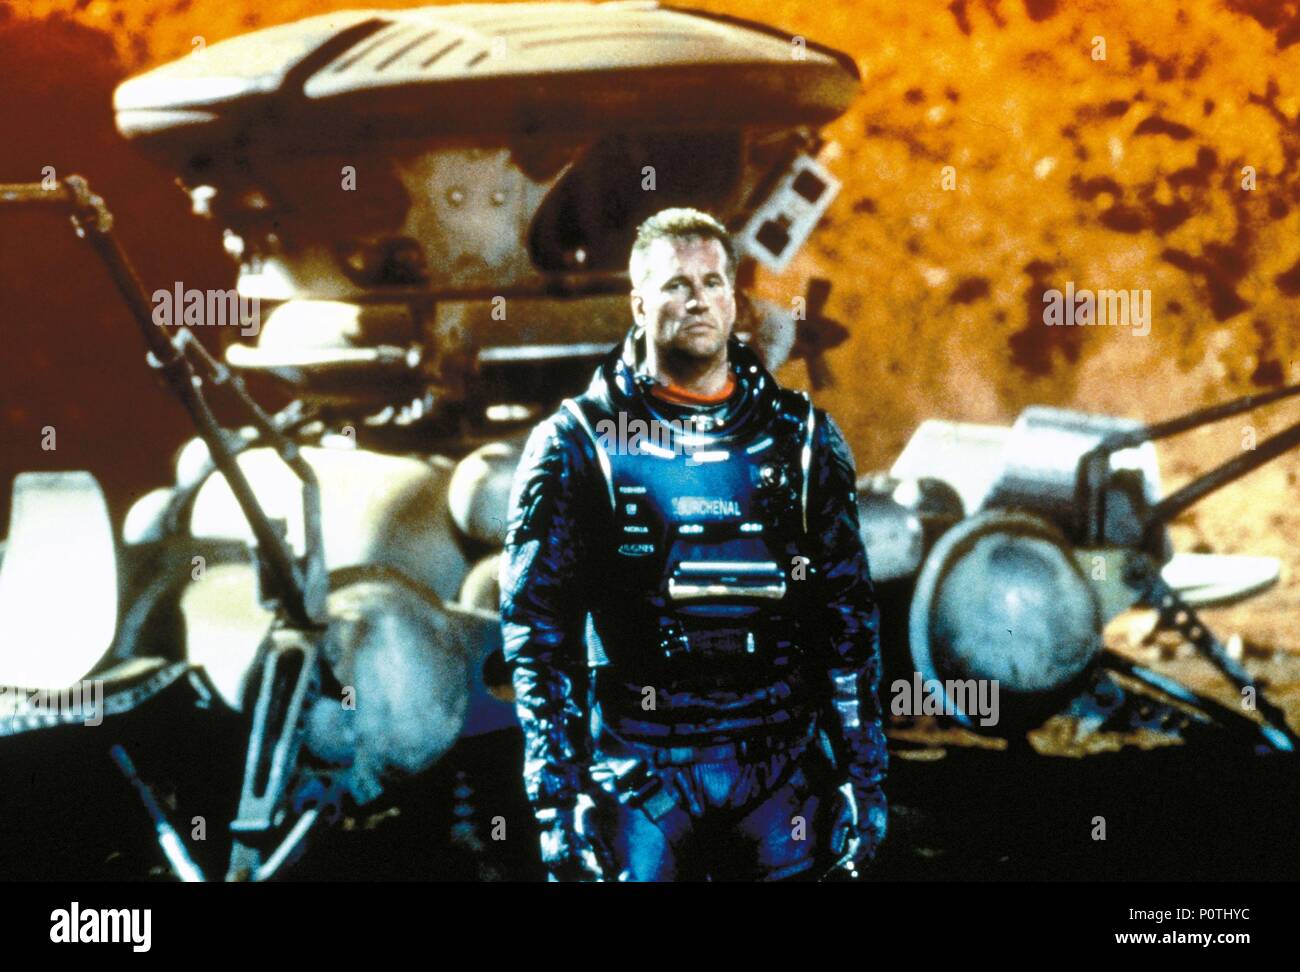 Original Film Title: RED PLANET.  English Title: RED PLANET.  Film Director: ANTHONY HOFFMAN.  Year: 2000.  Stars: VAL KILMER. Credit: WARNER BROS. PICTURES / Album Stock Photo